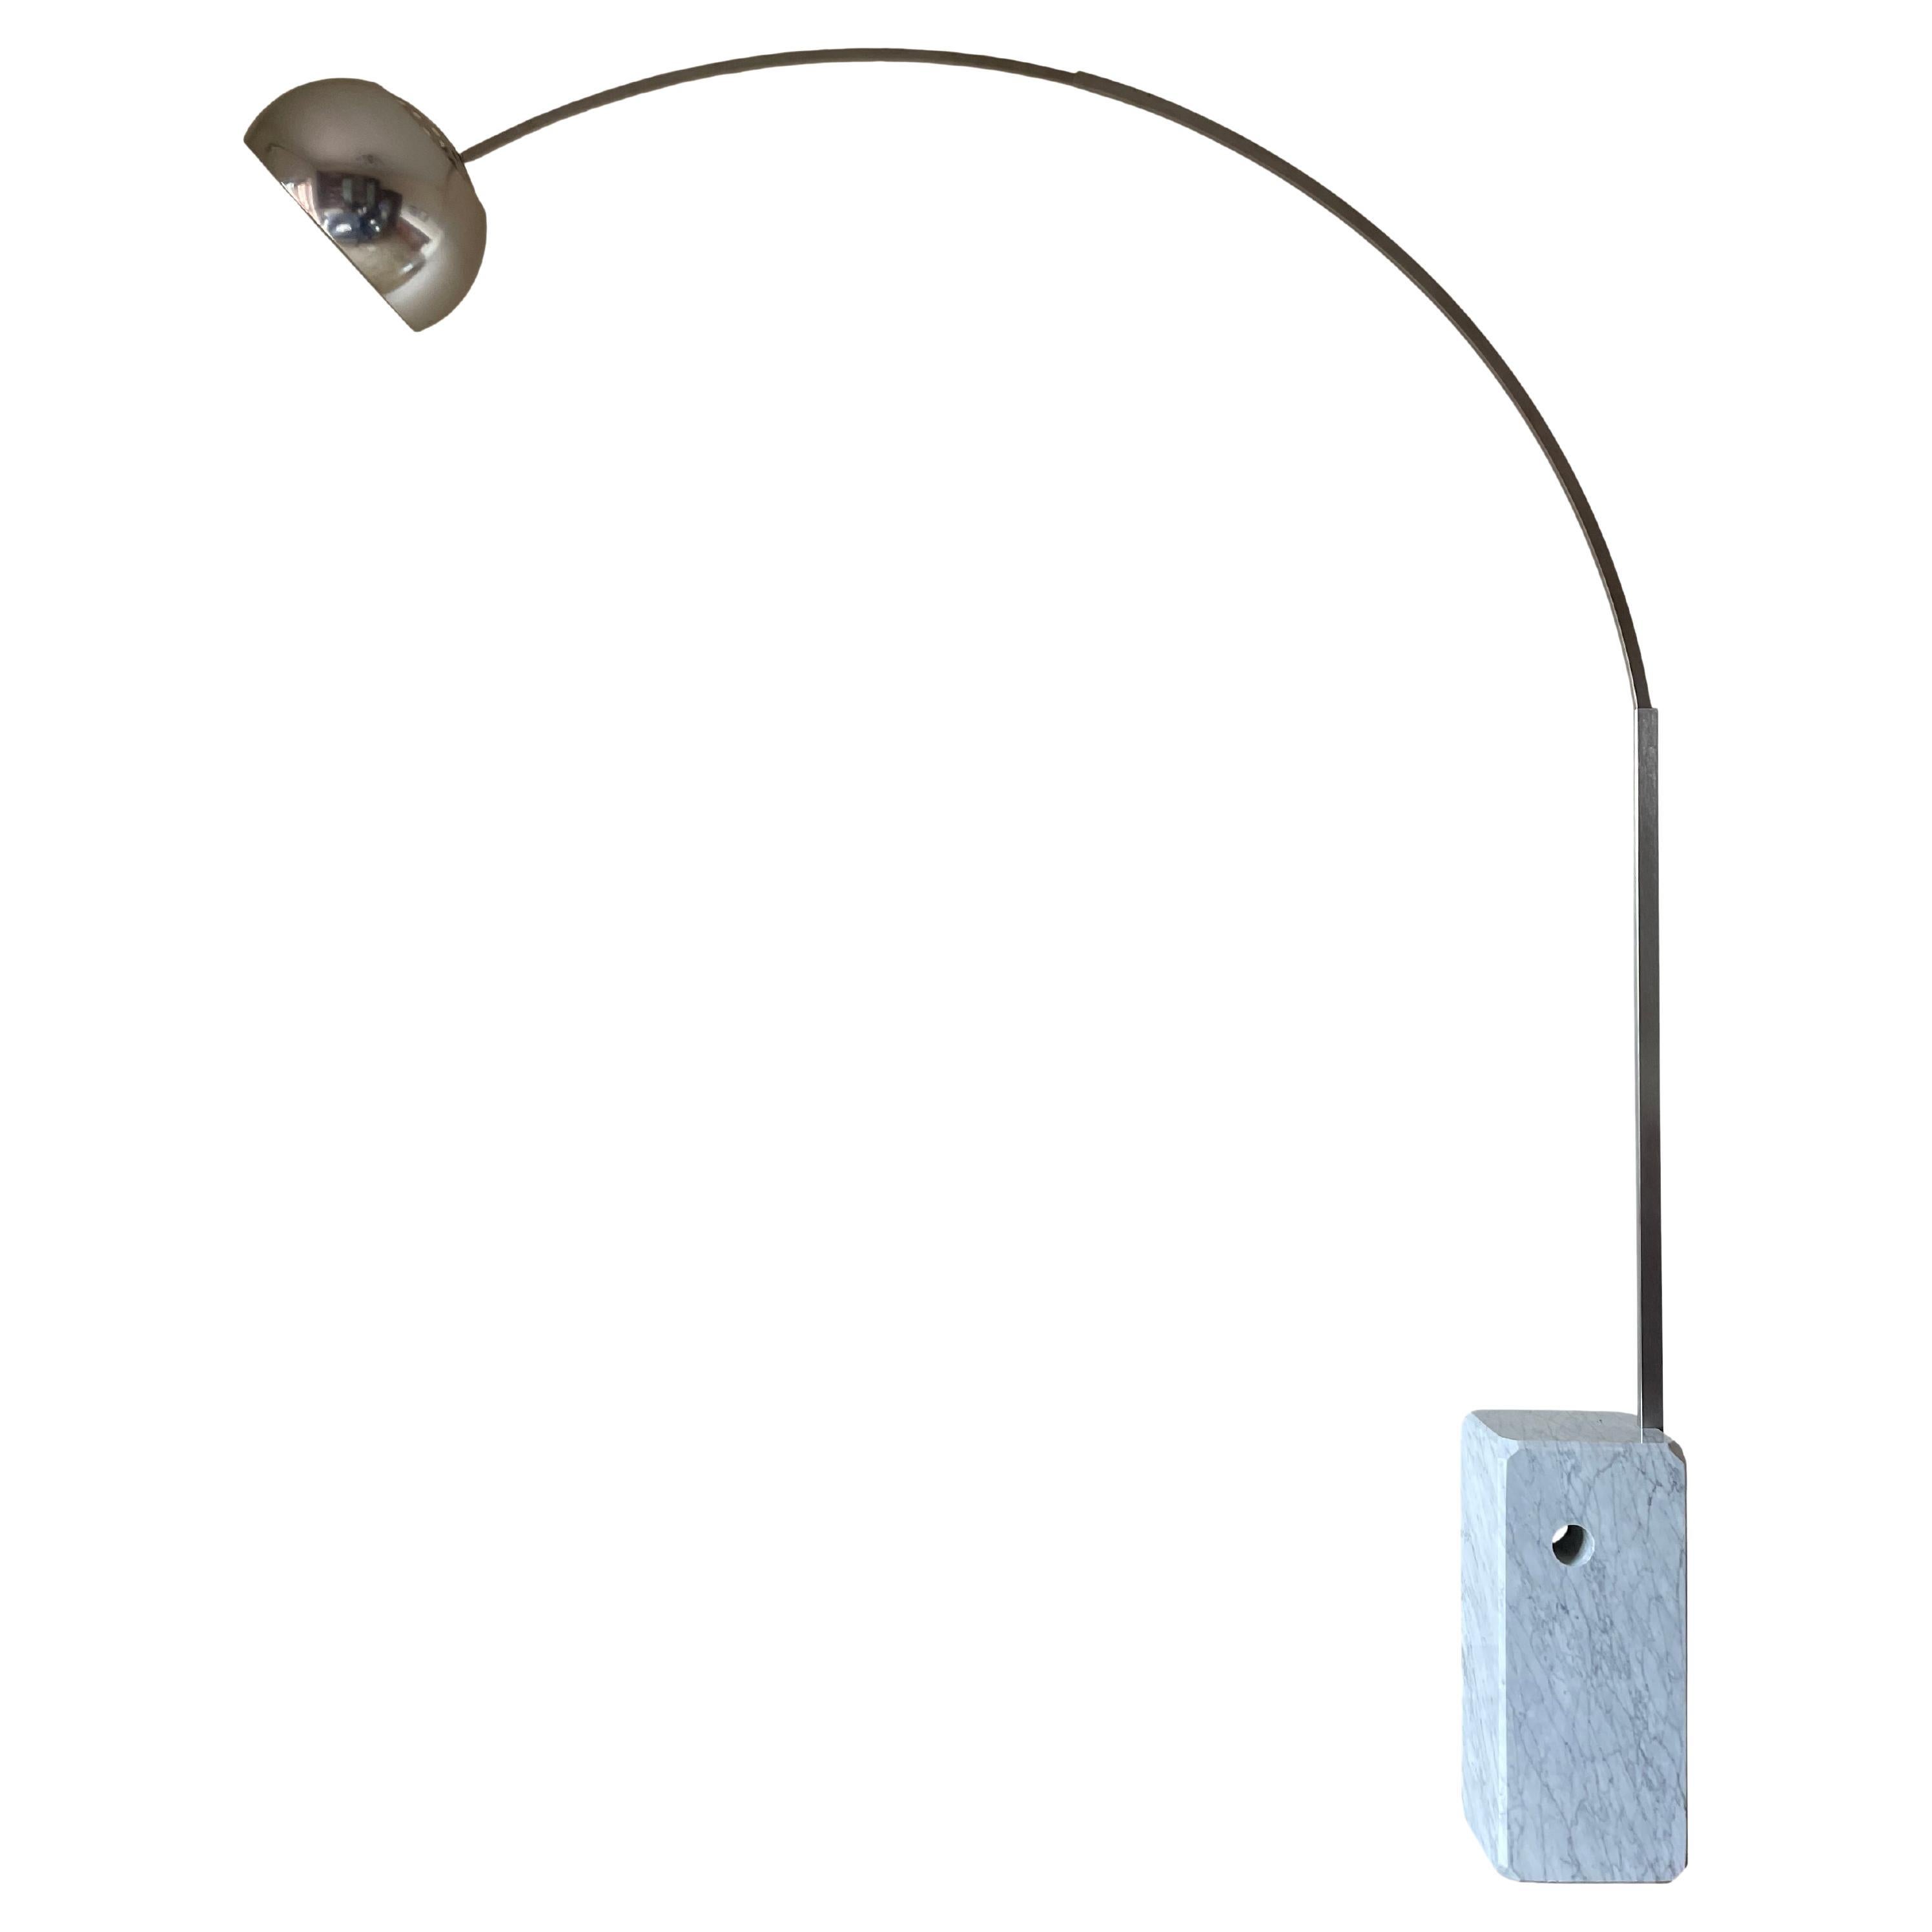 Achille & Pier Giacomo Castiglioni Marble and Steel Arco Lamp for FLOS, 1967 For Sale